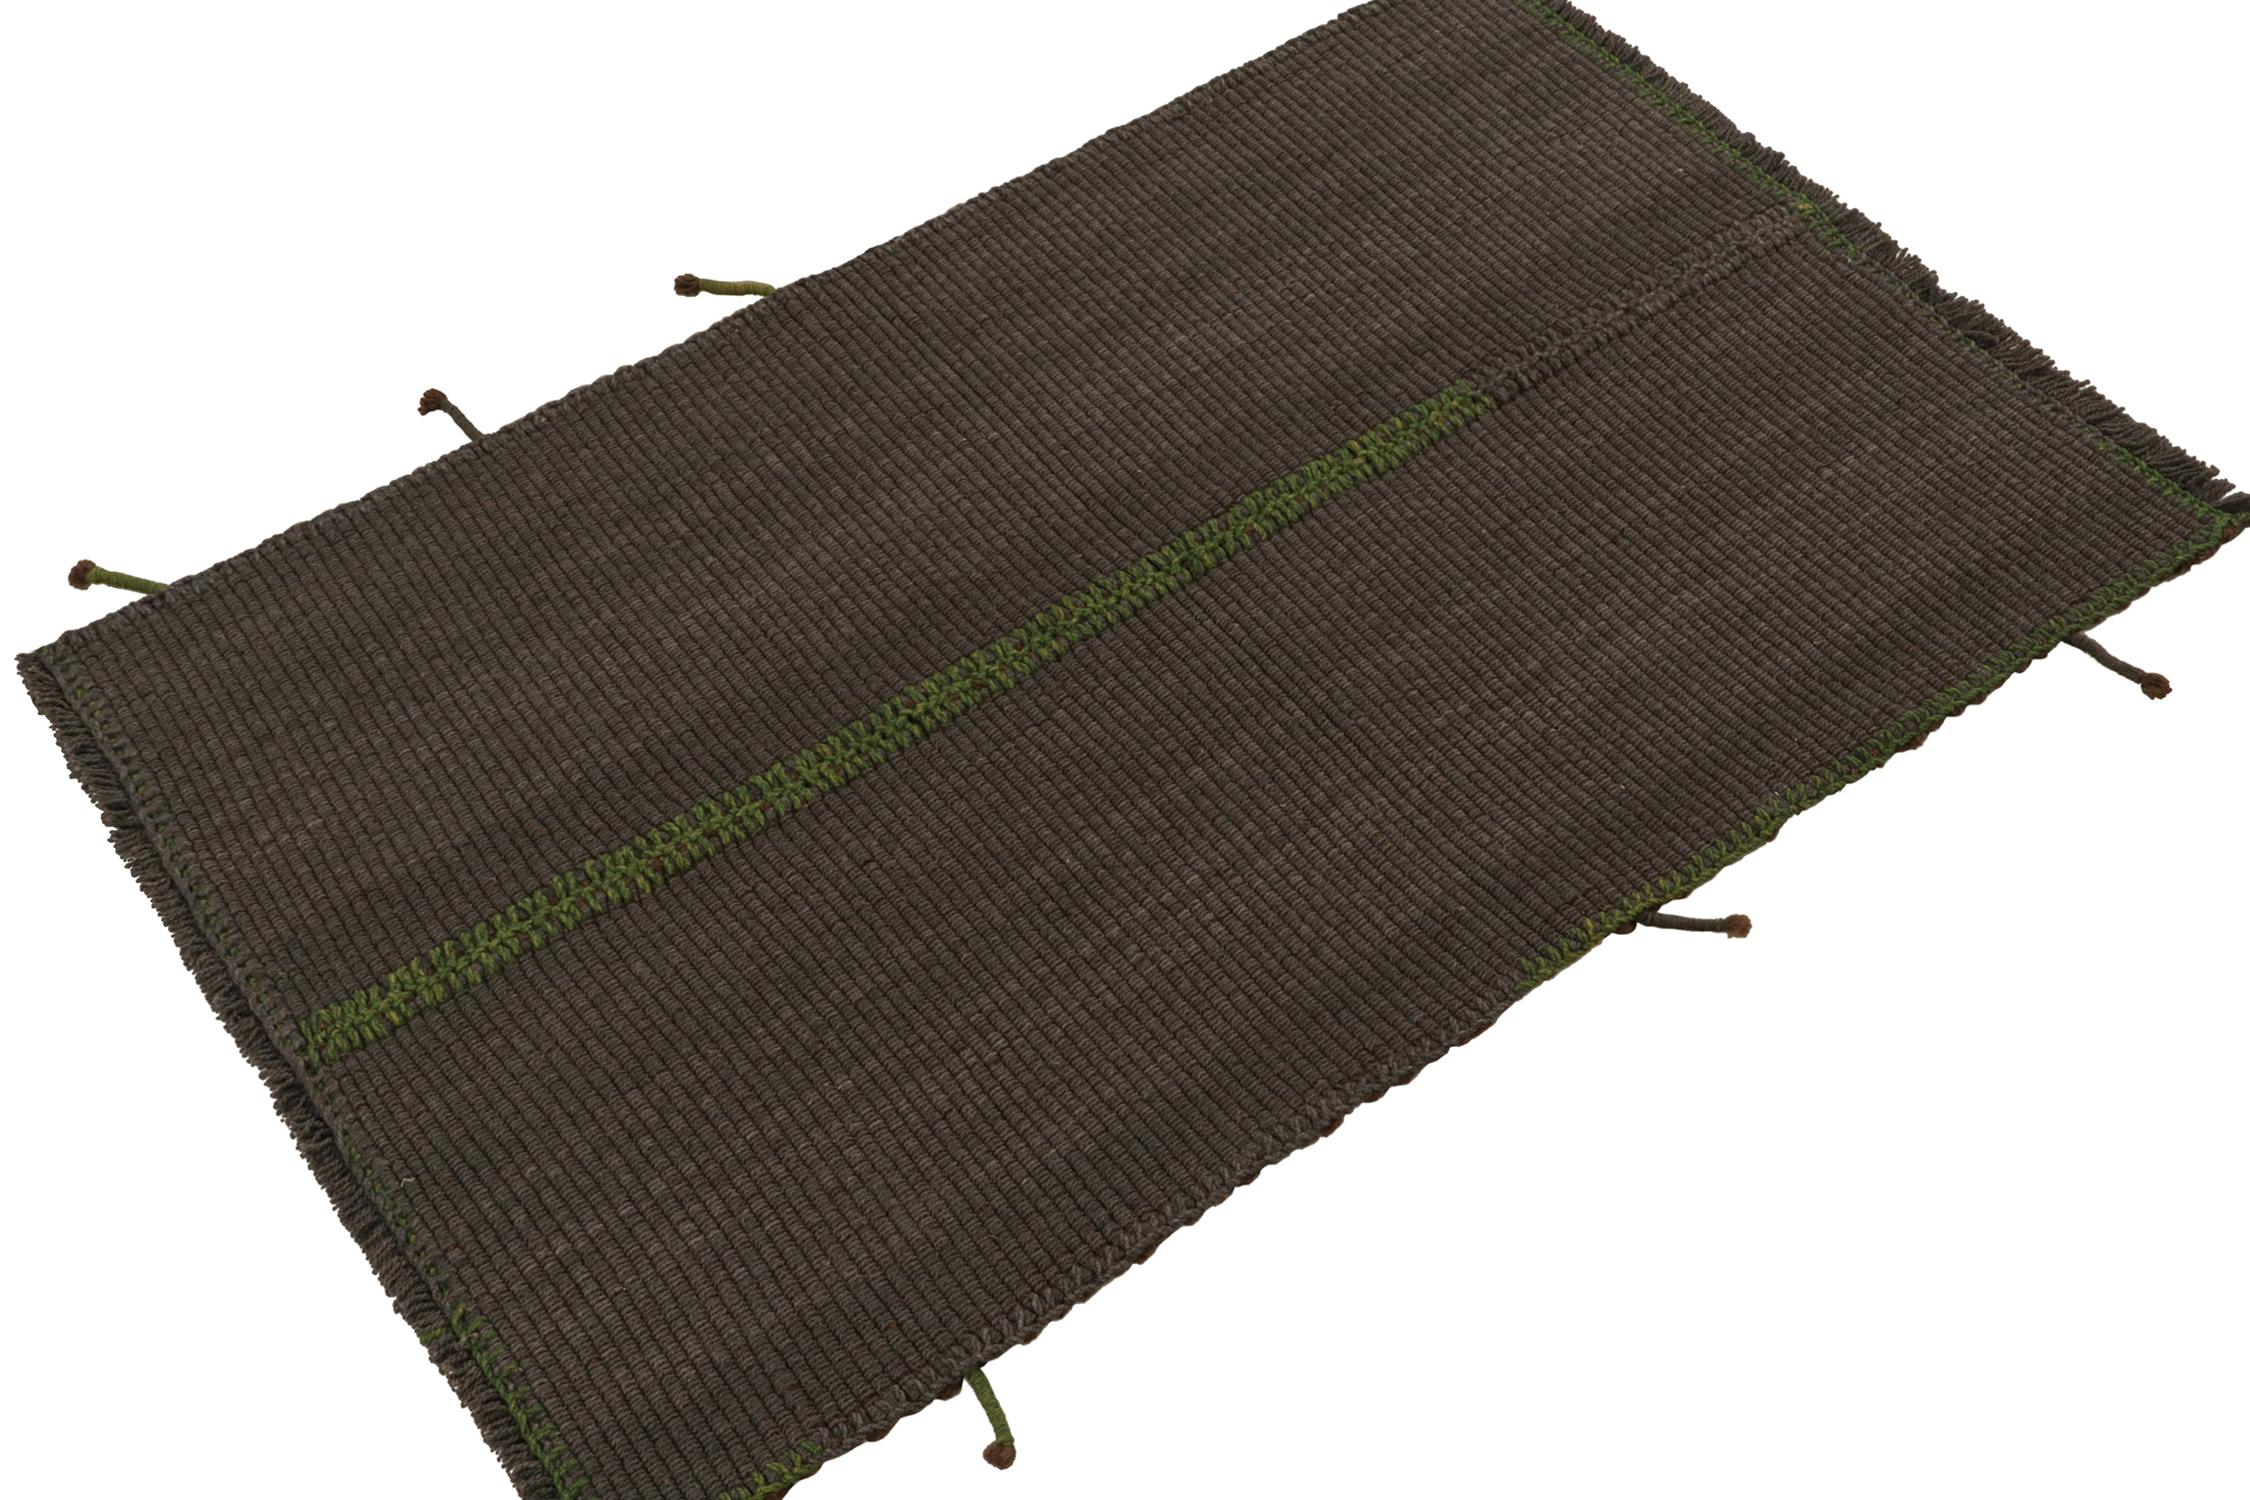 Handwoven in wool, a 3x4 gift-sized Kilim from an inventive new contemporary flat weave collection by Rug & Kilim.
On the Design: The “Rez Kilim” connotes a modern take on classic panel weaving—enjoying brown columns with refreshing green accents.